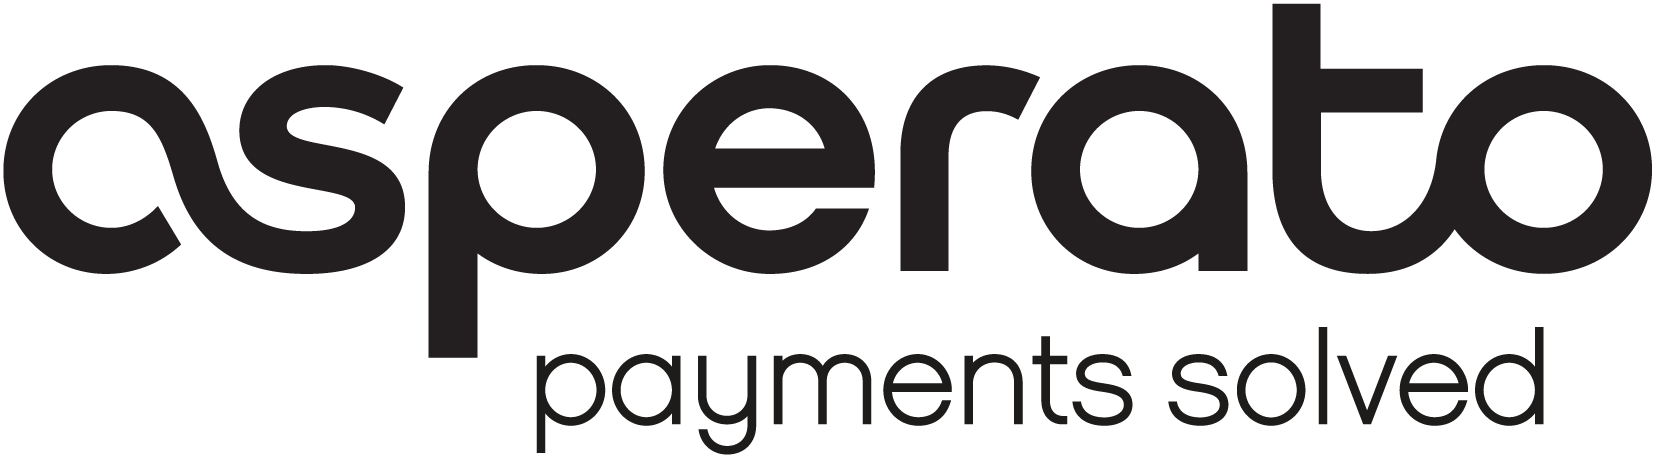 Asperato payments solved